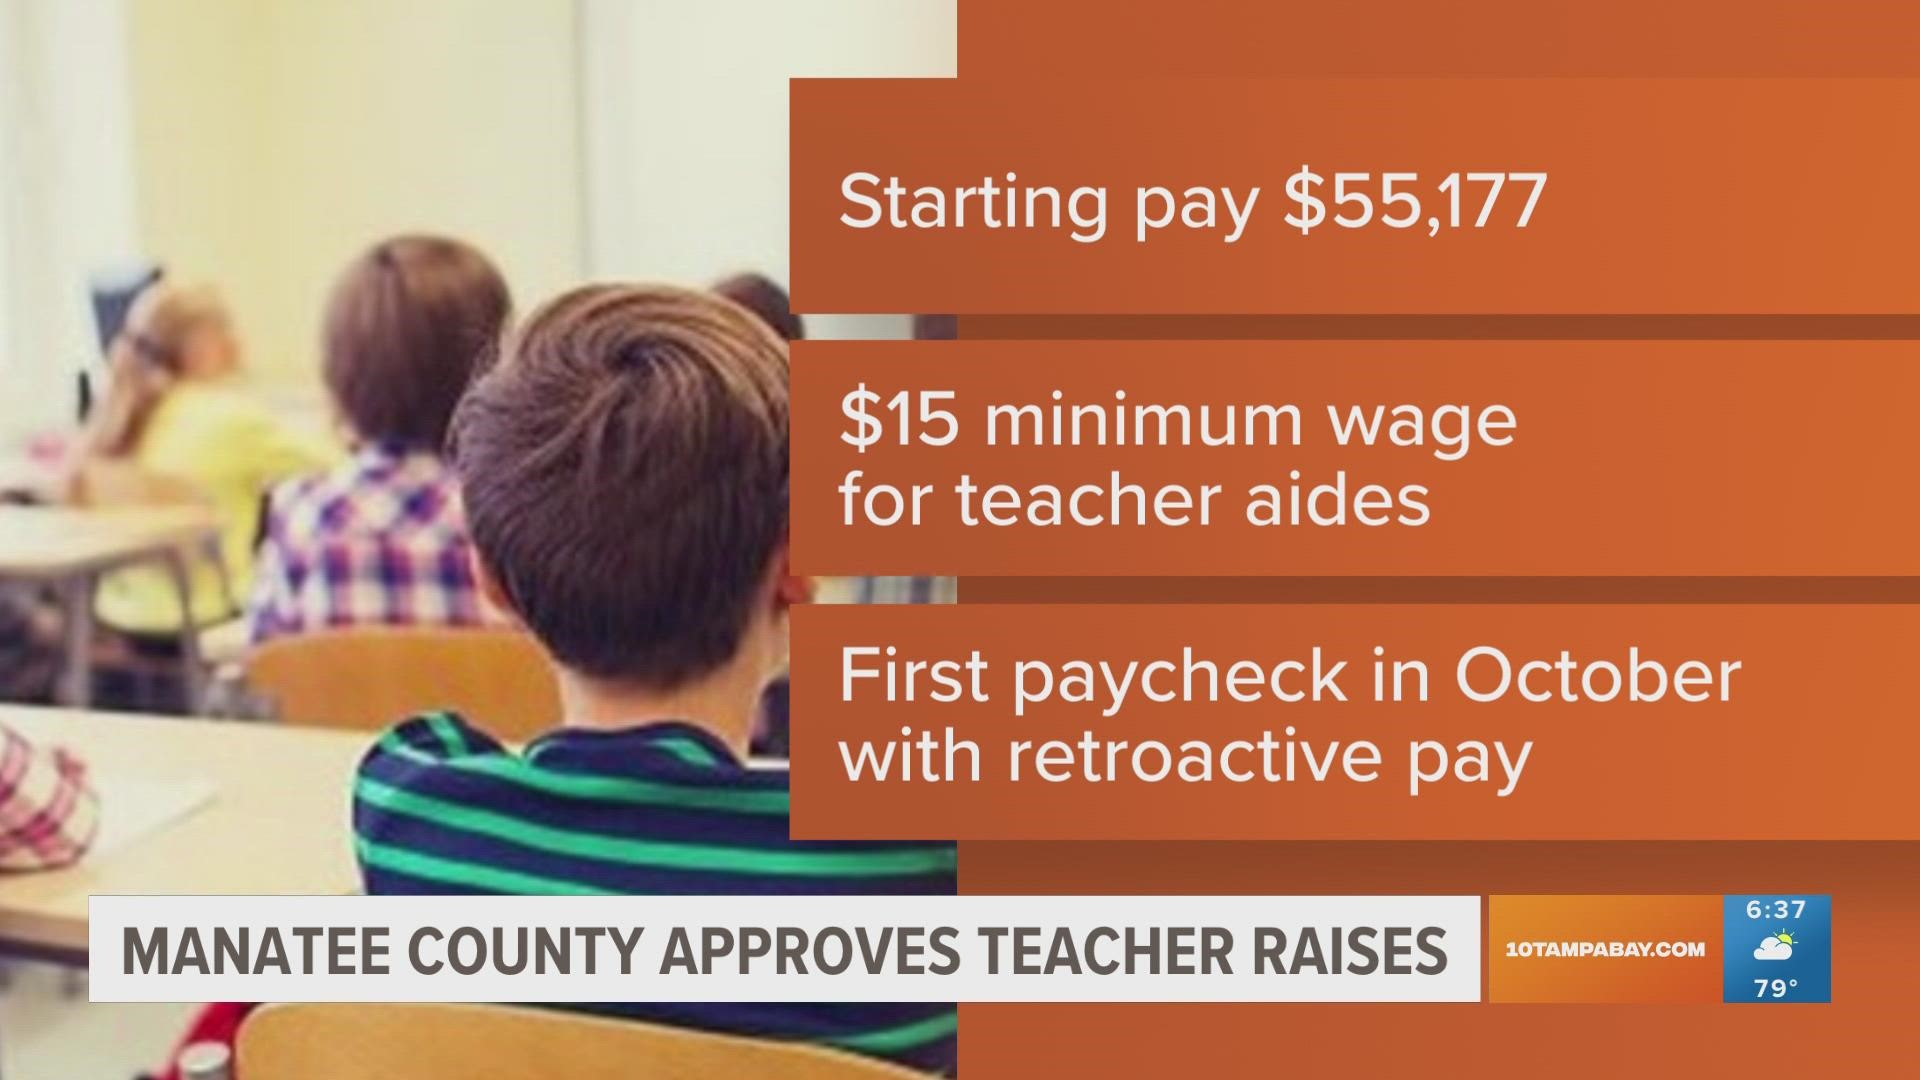 The pay increase is retroactive, meaning teachers will see their pay increases starting in October.